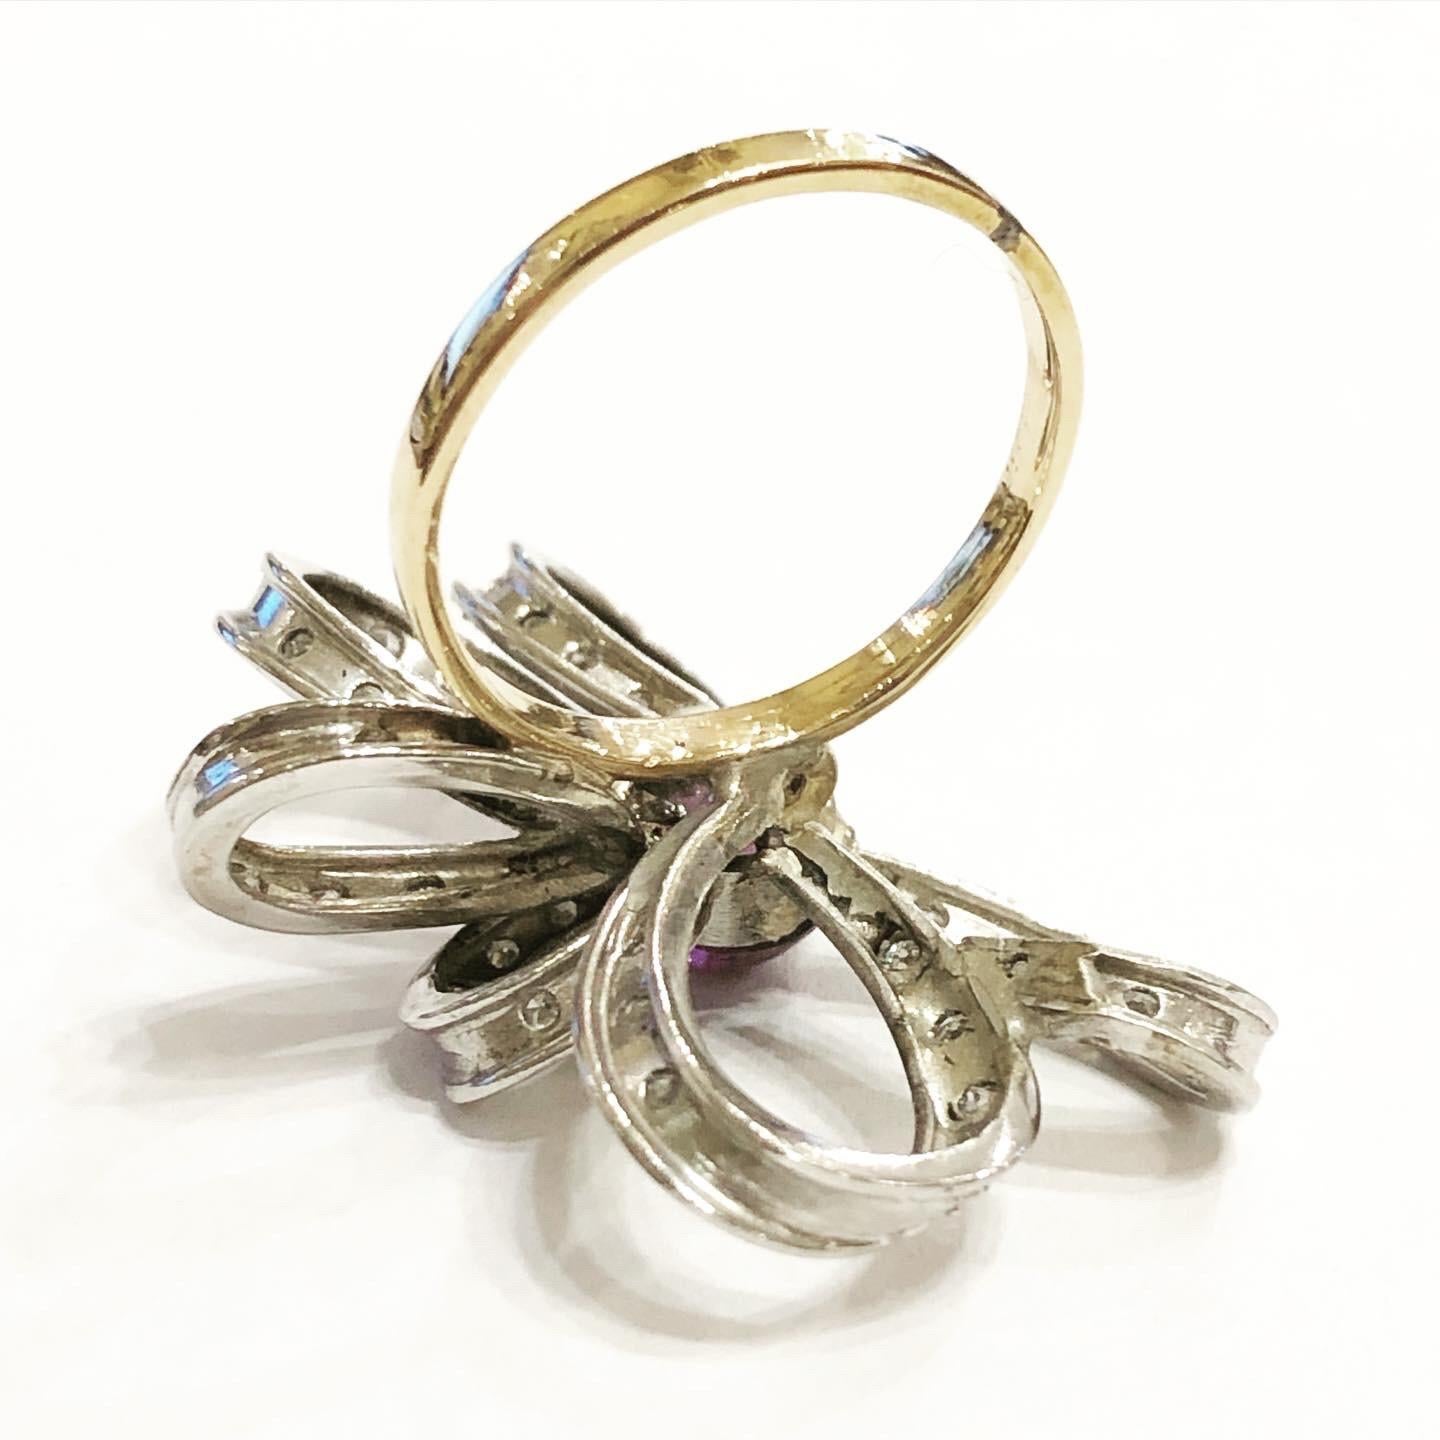 1950s Diamonds Amethyst Platinum 18k white gold cocktail ribbon ring.
Ring in platinum and 18 karat yellow gold.
Superb fashion ring, ribbon design typical for this period.
Circa 1950.
Brilliant diamond cut.
Cabochon amethyst cut.
Total weight of